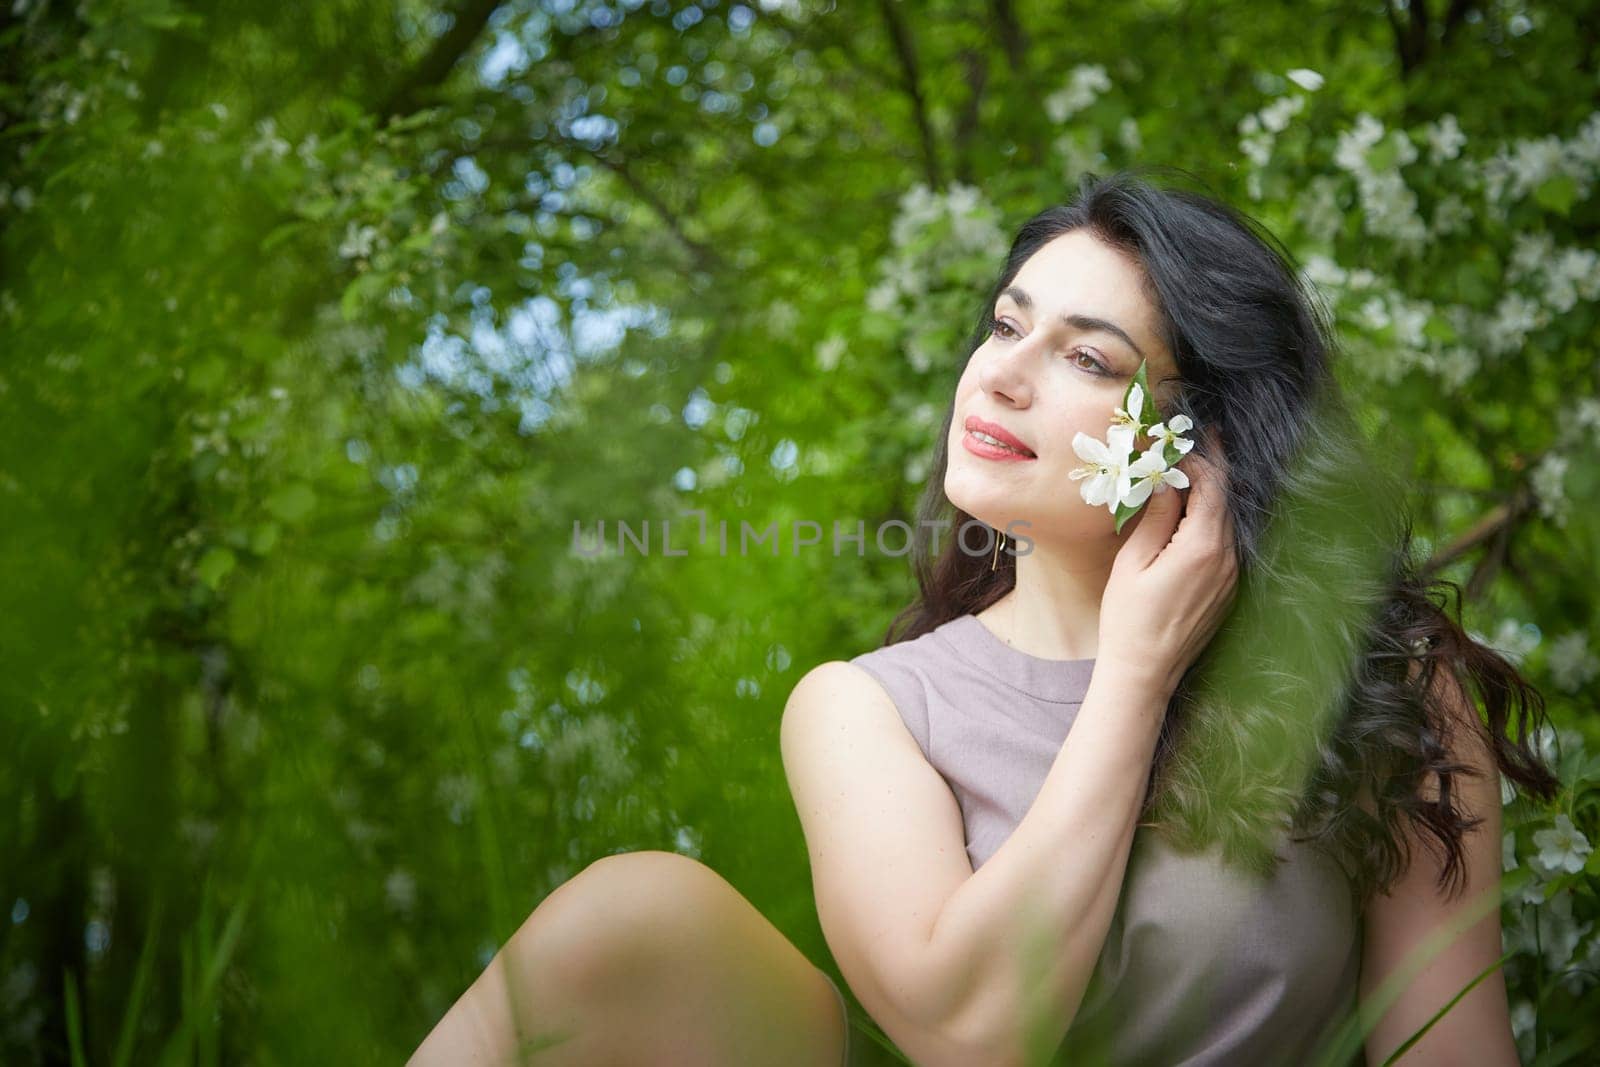 Joyous brunette woman near Blossoms of apple tree in a Spring Garden outdoors. The Concept of face and body care. The scent of perfume and tenderness